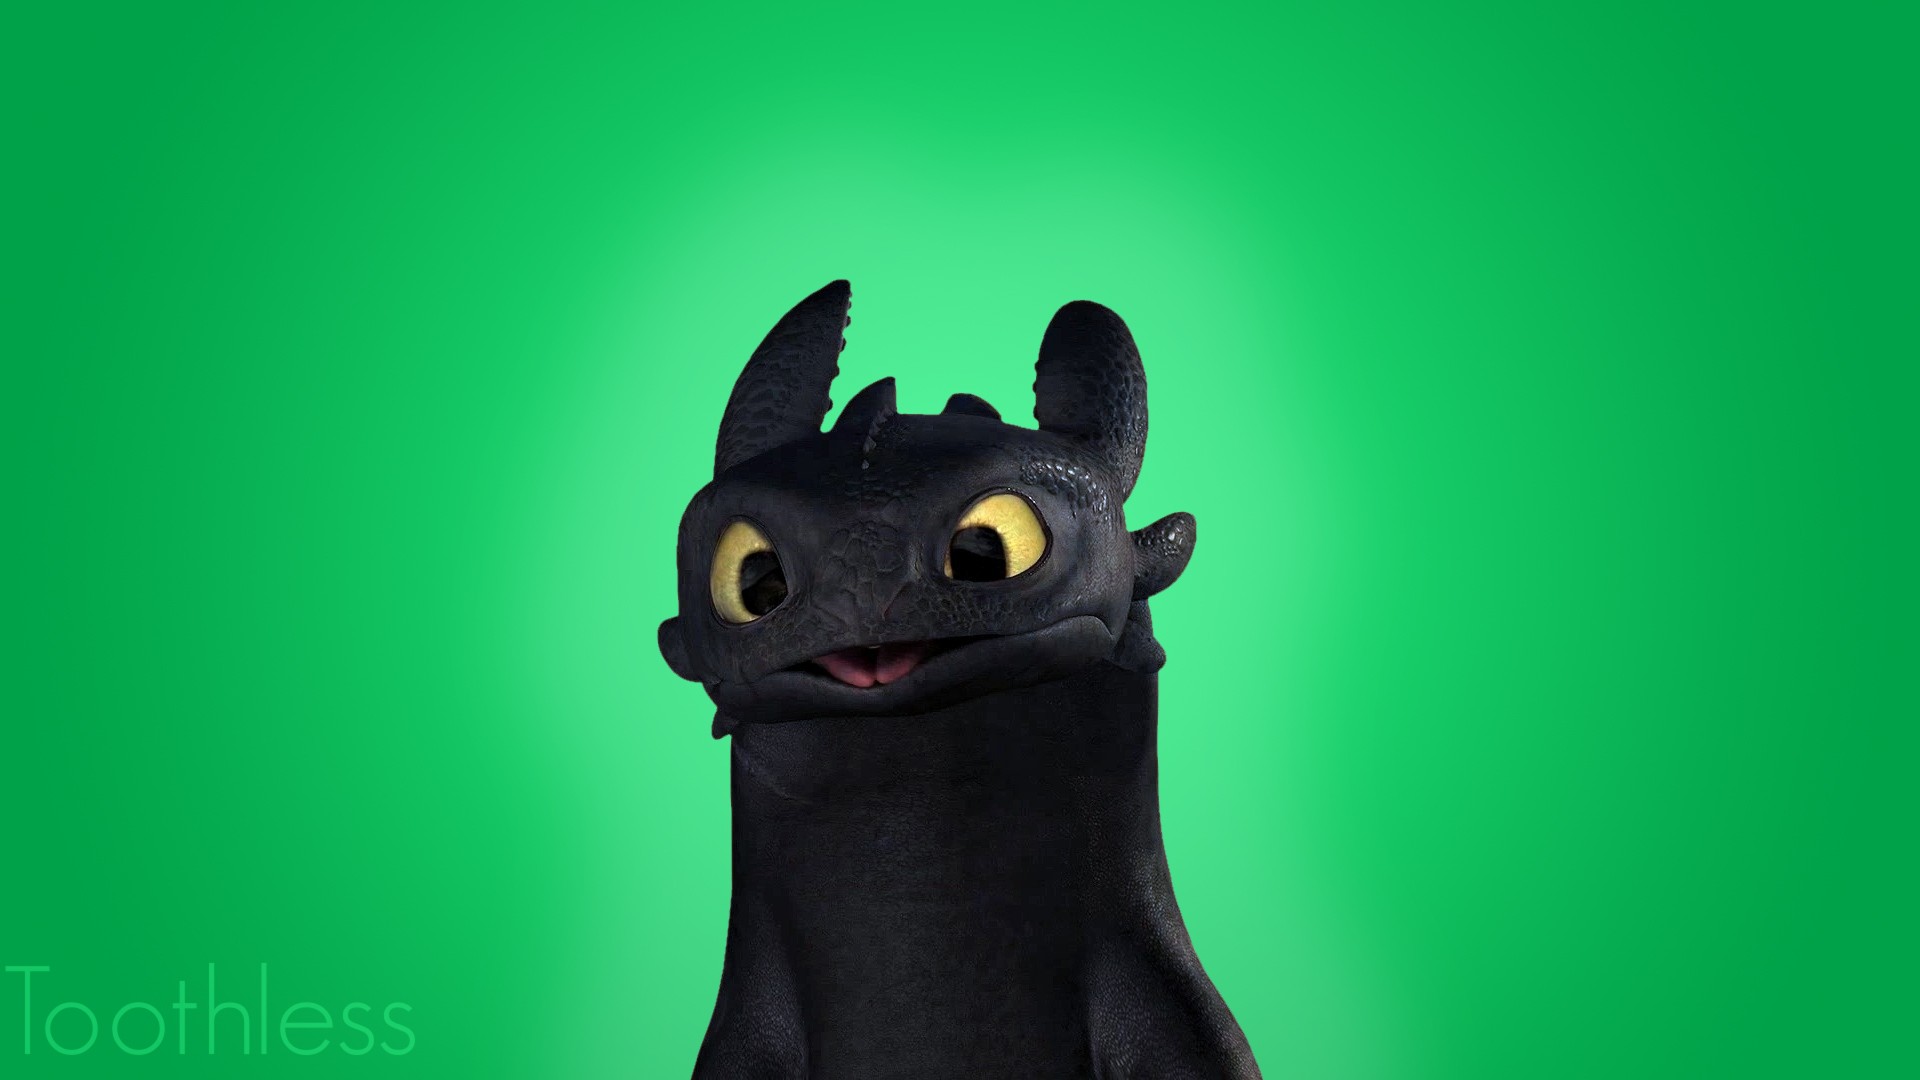 General 1920x1080 Toothless How to Train Your Dragon How to Train Your Dragon 2 green background dragon creature simple background movies animated movies